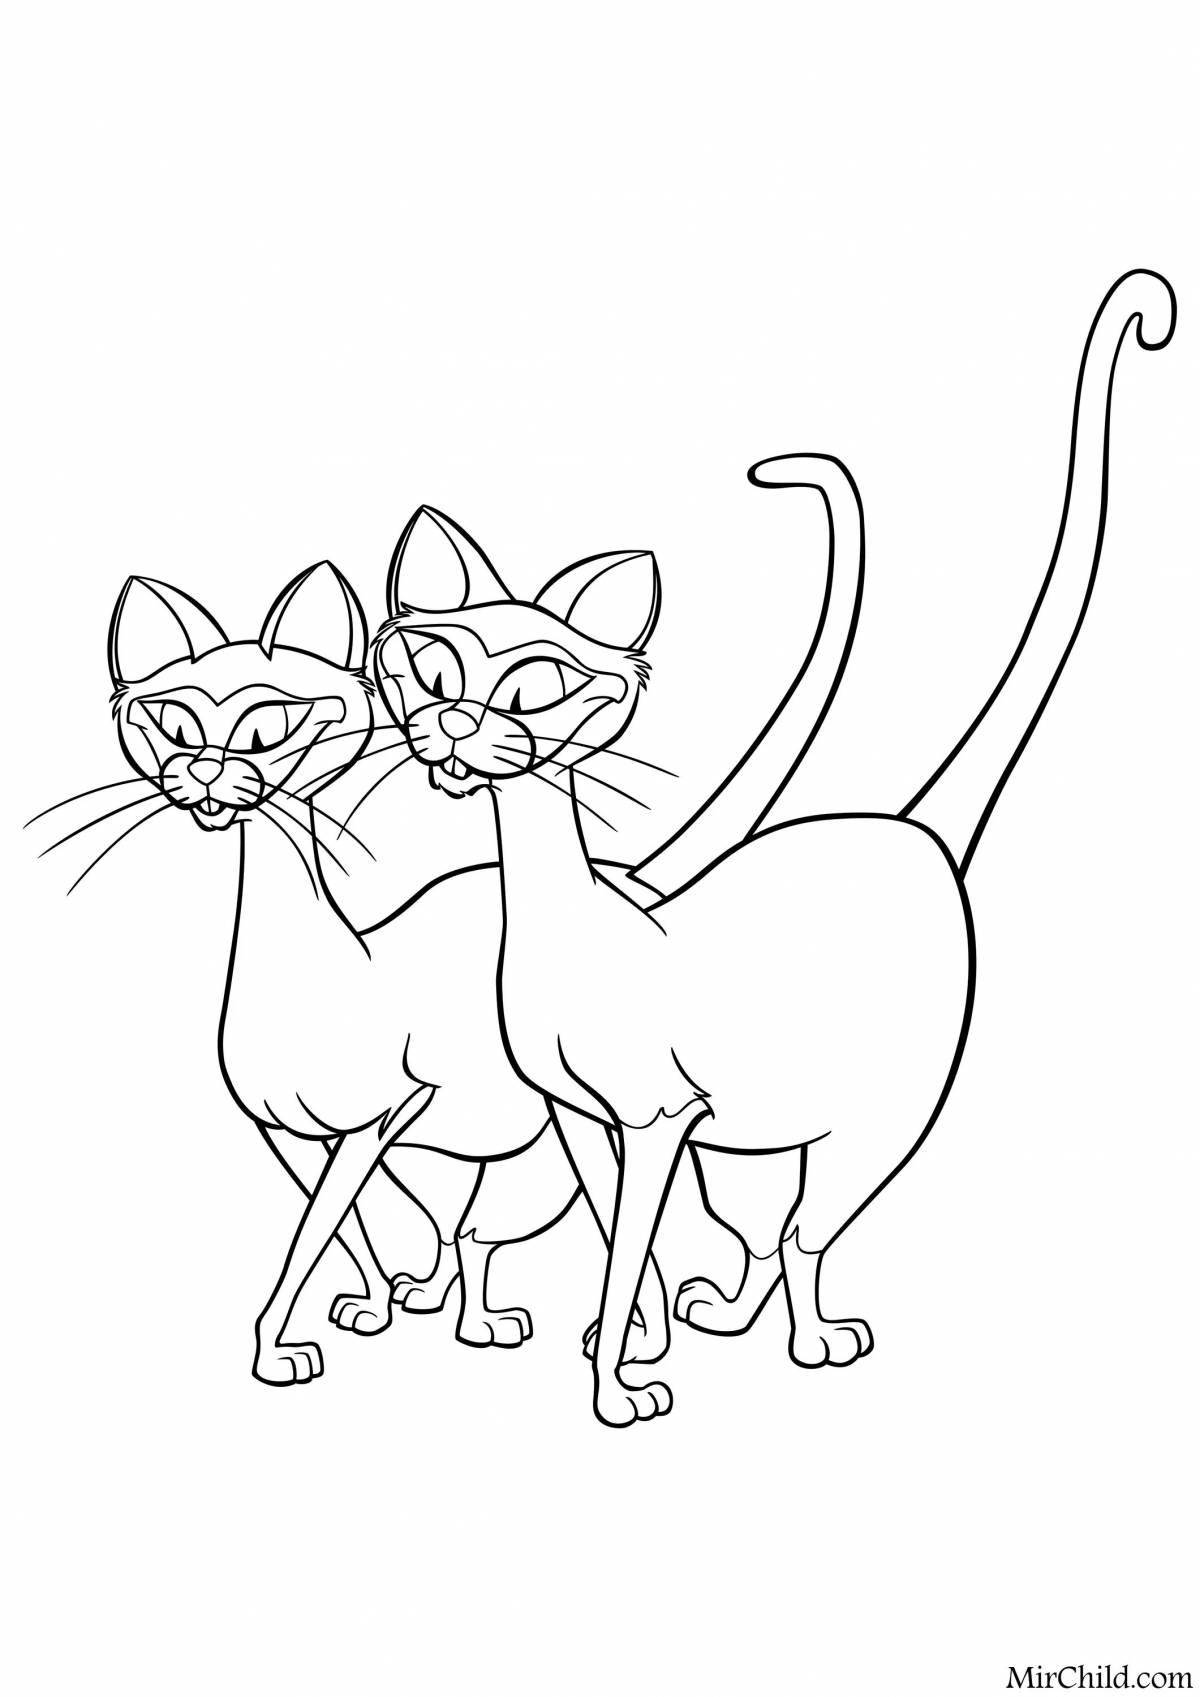 Fabulous Oliver and company coloring page